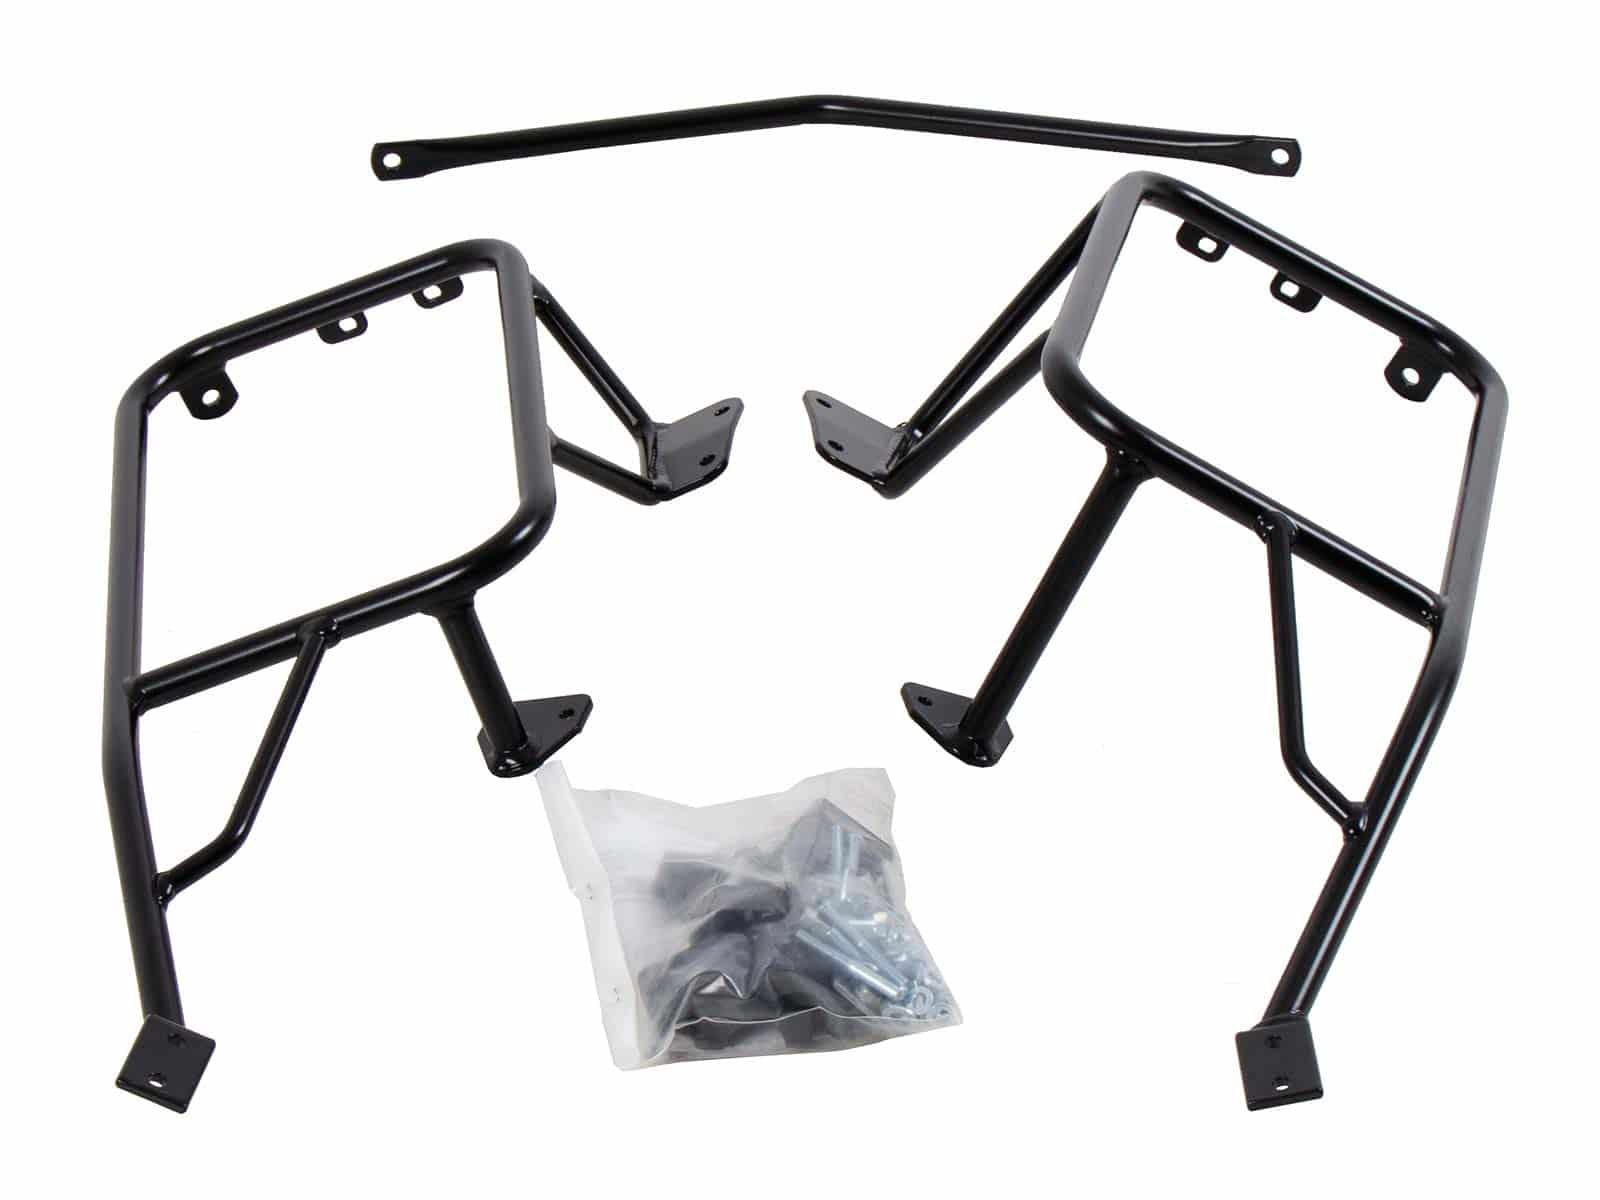 Sidecarrier permanent mounted black for BMW R 1200 GS Adventure (2006-2013)